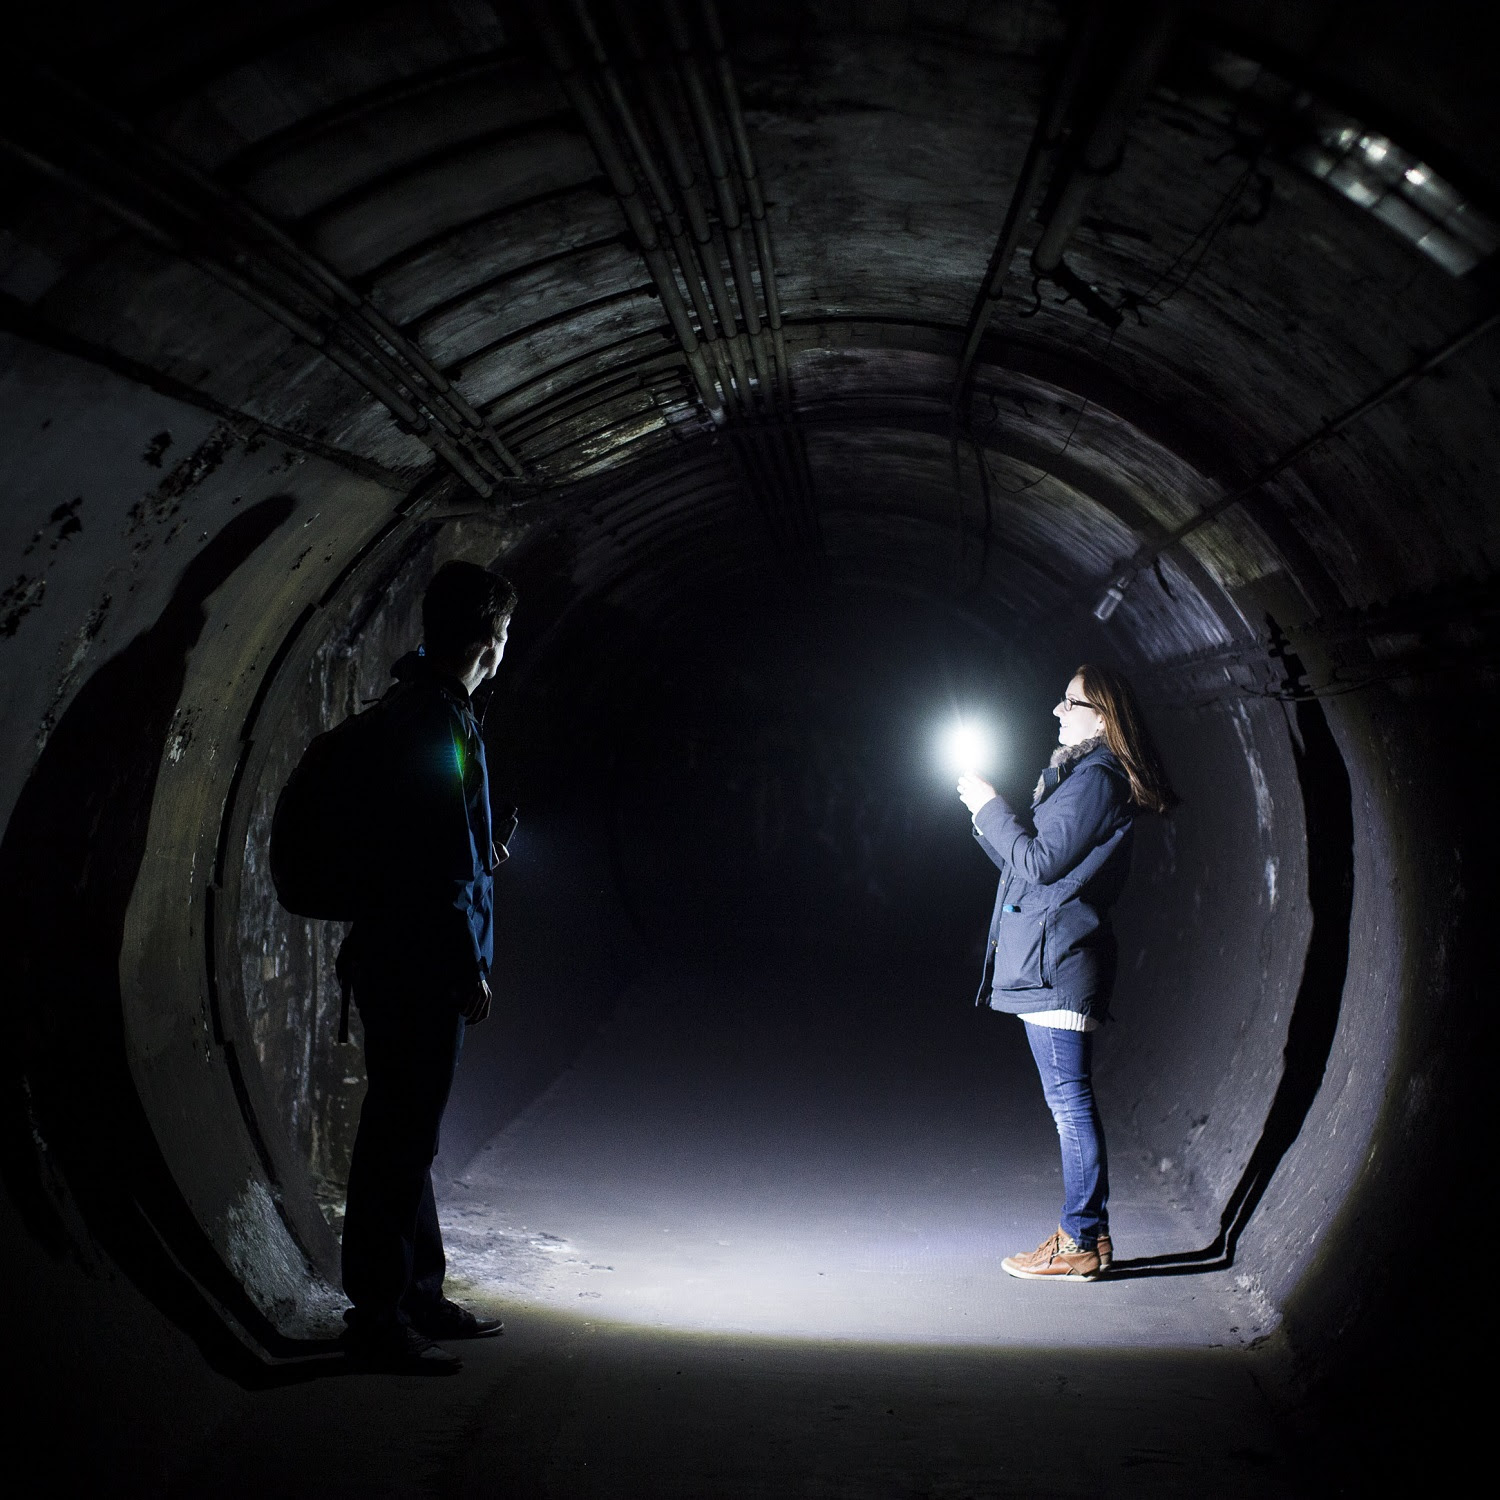 Two people shining a torch into a dark circular tunnel